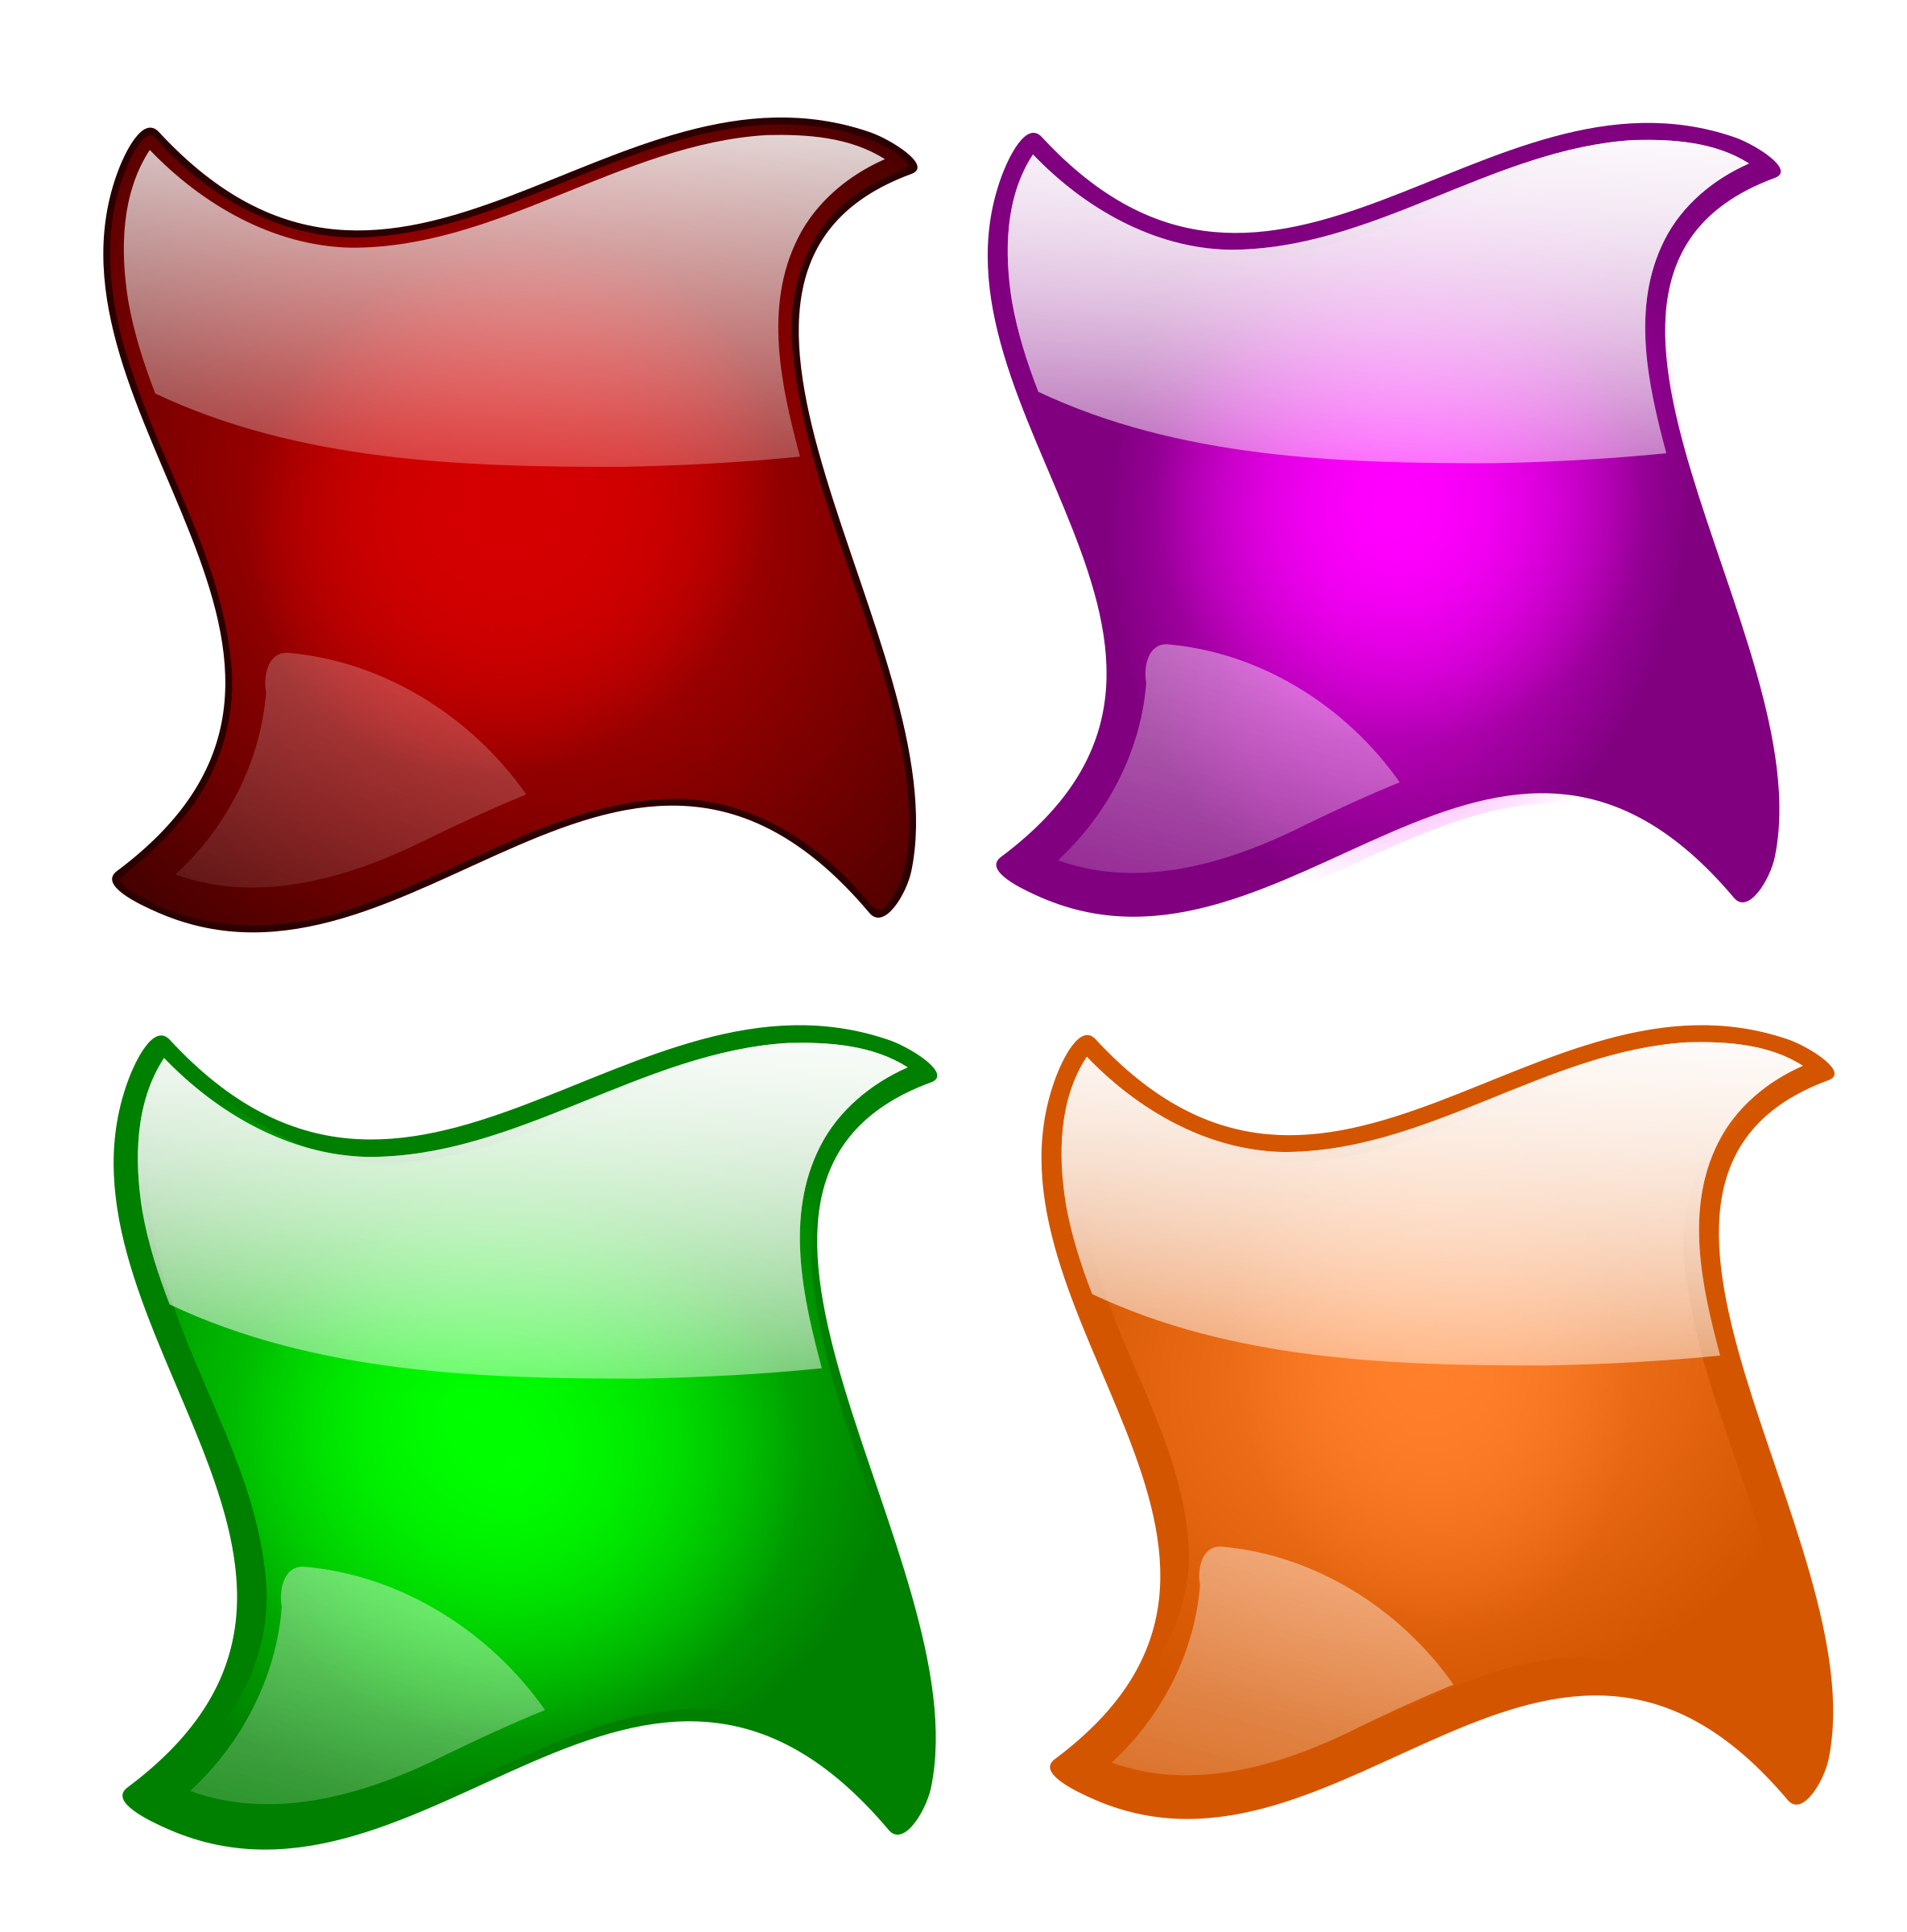 Glossy shapes icons png. Preschool clipart shape